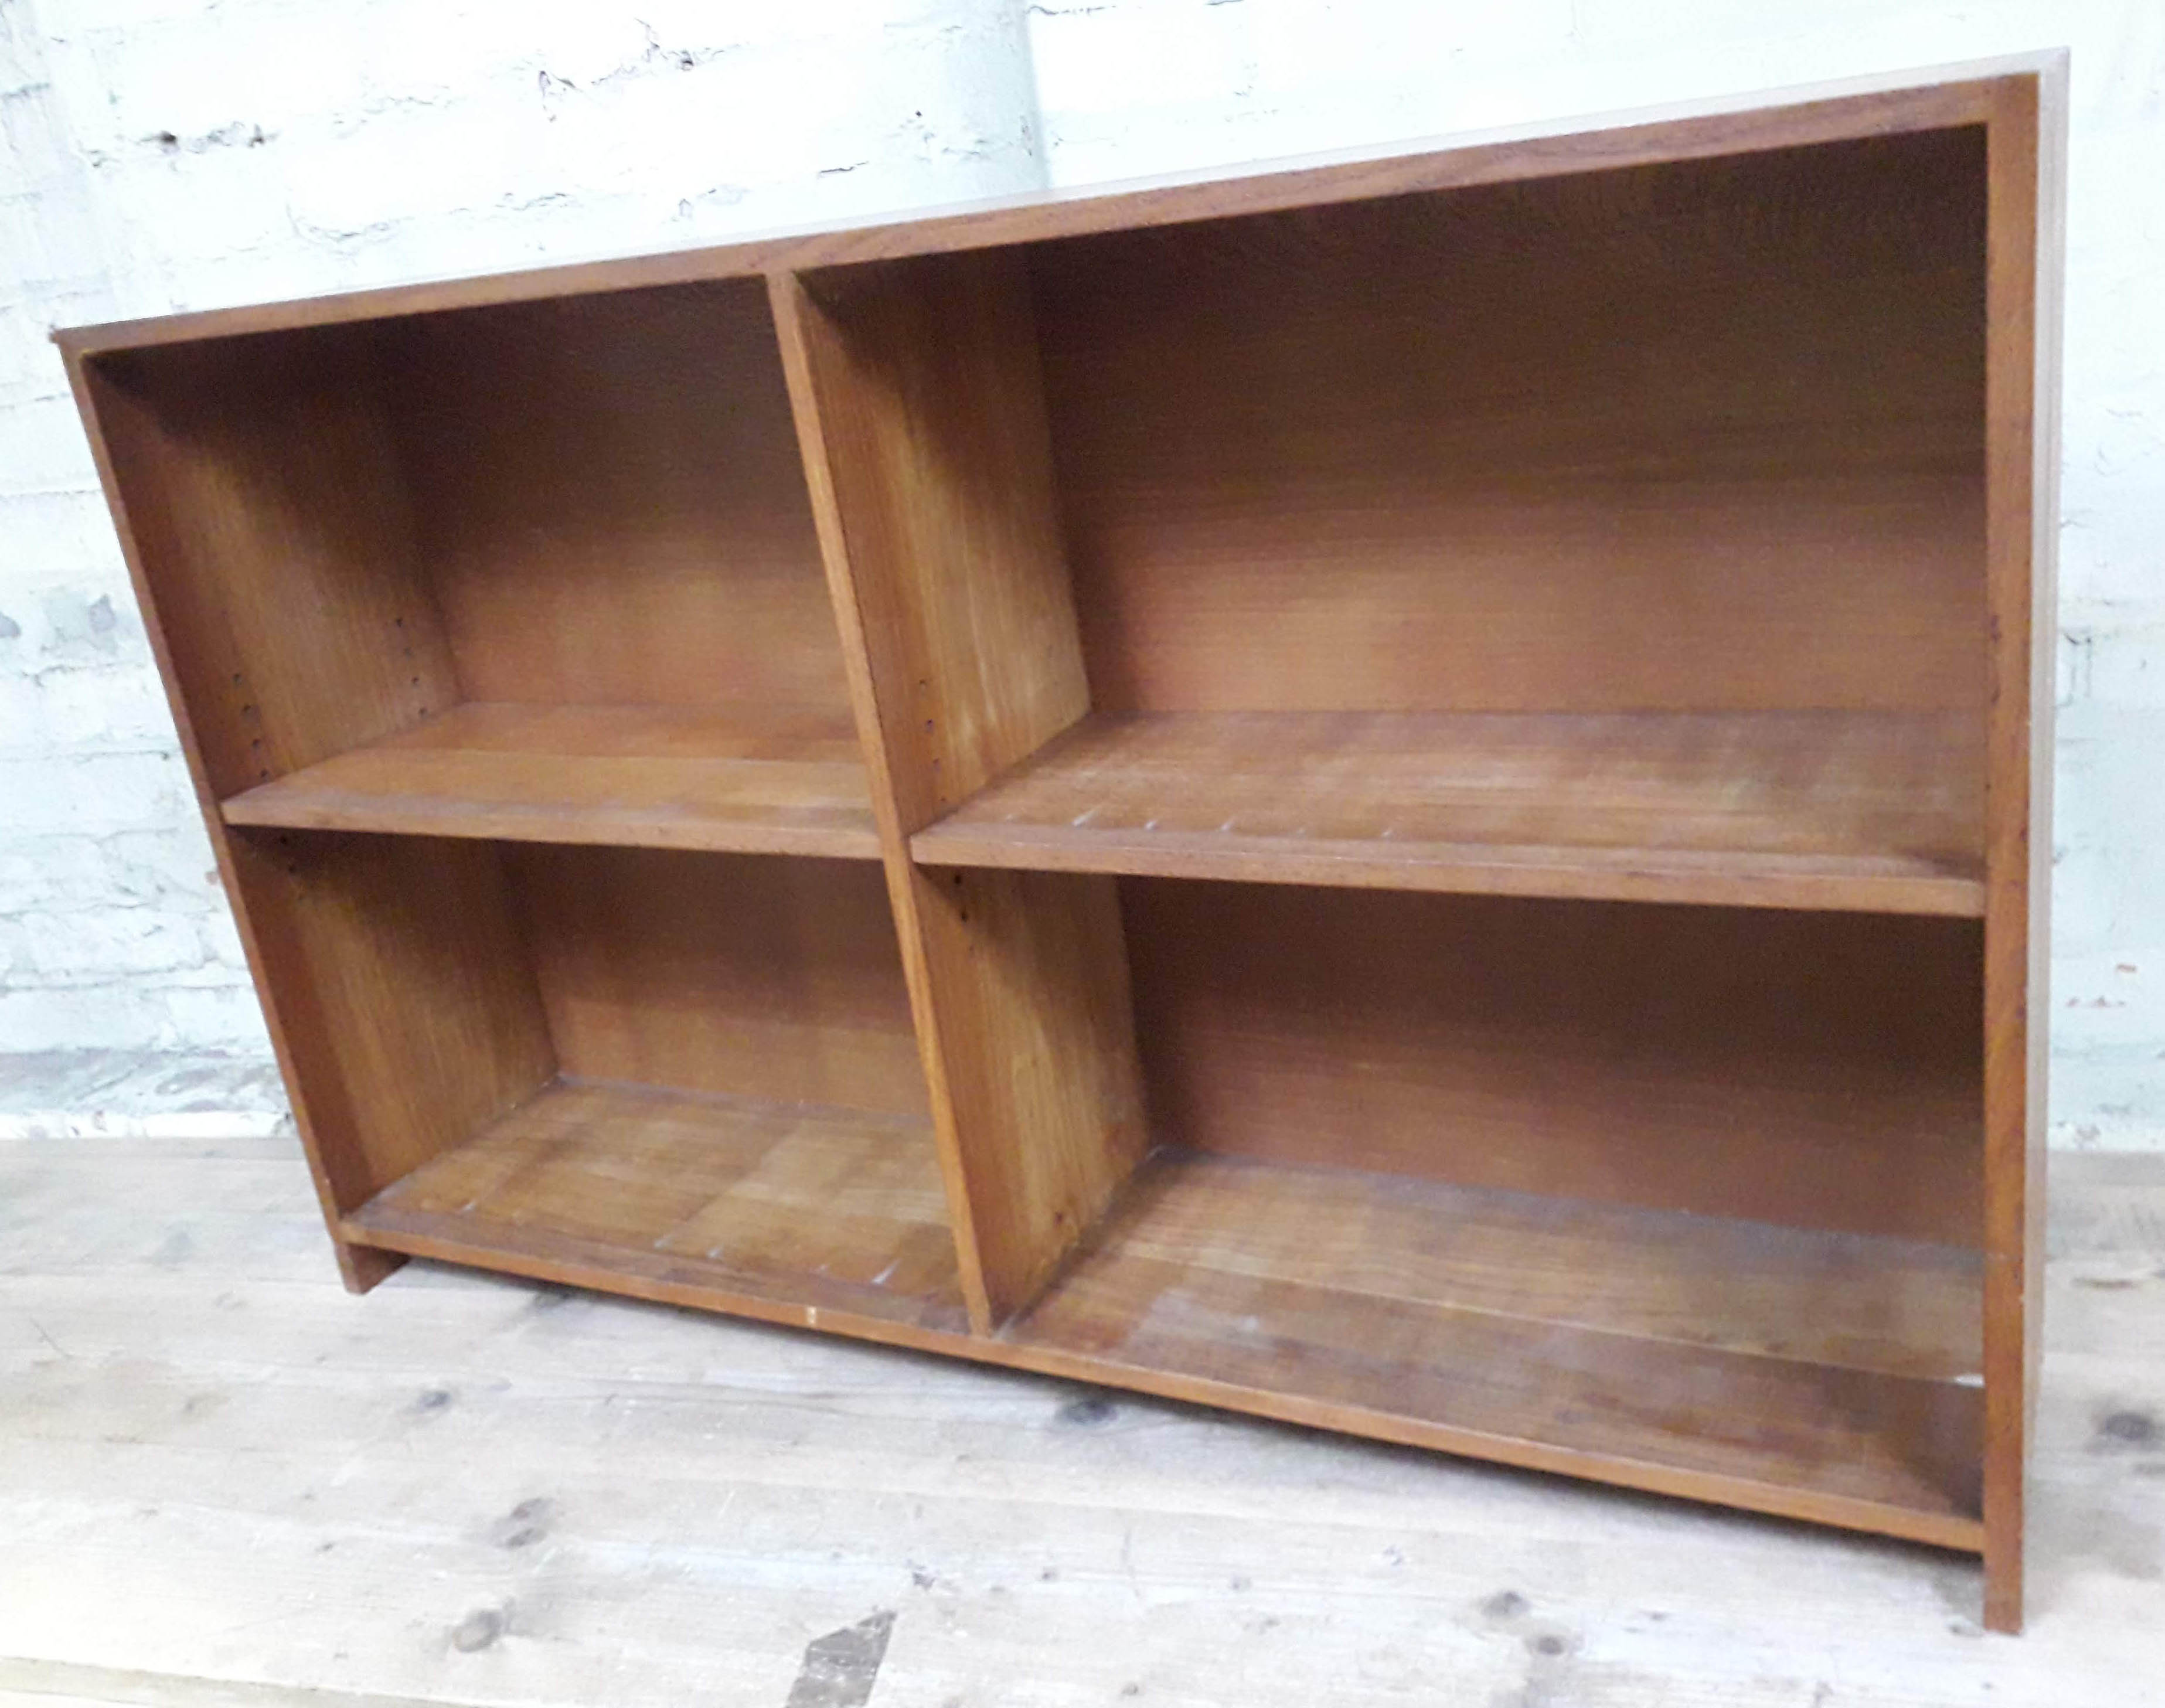 An open oak bookcase with visible dovetail/mortise and tenon joints and two adjustable shelves,